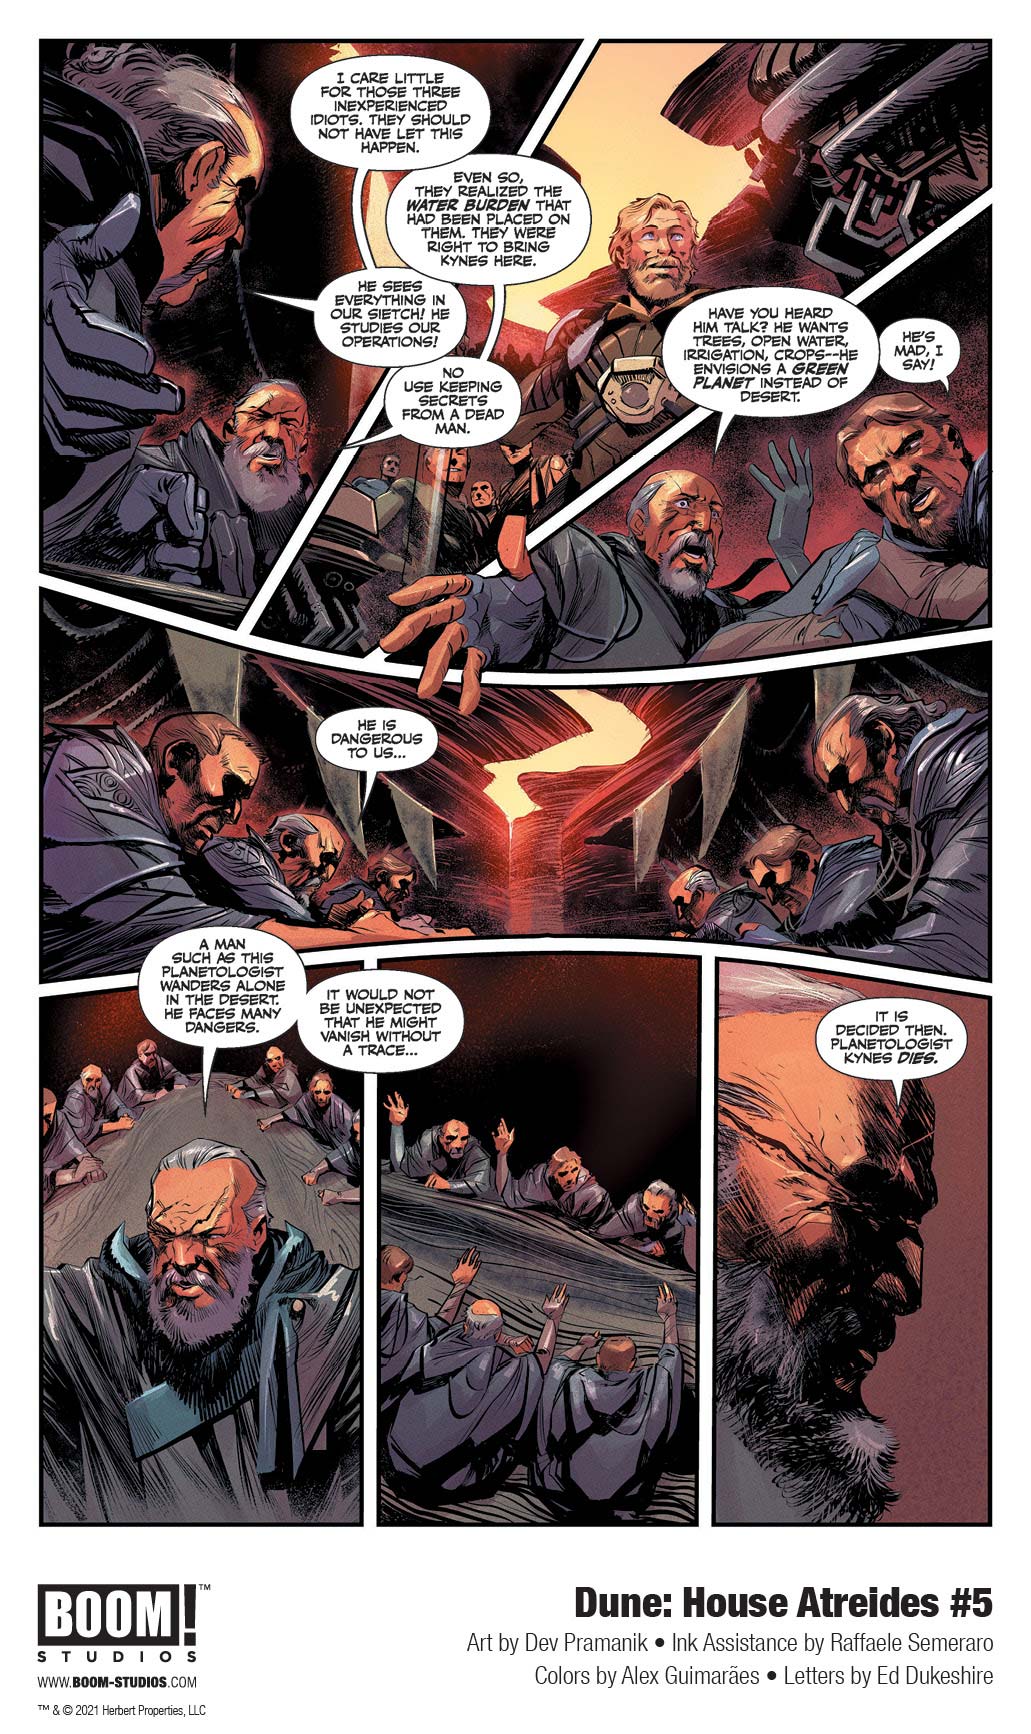 Dune: House Atreides comic series. Issue #5, preview page 2.